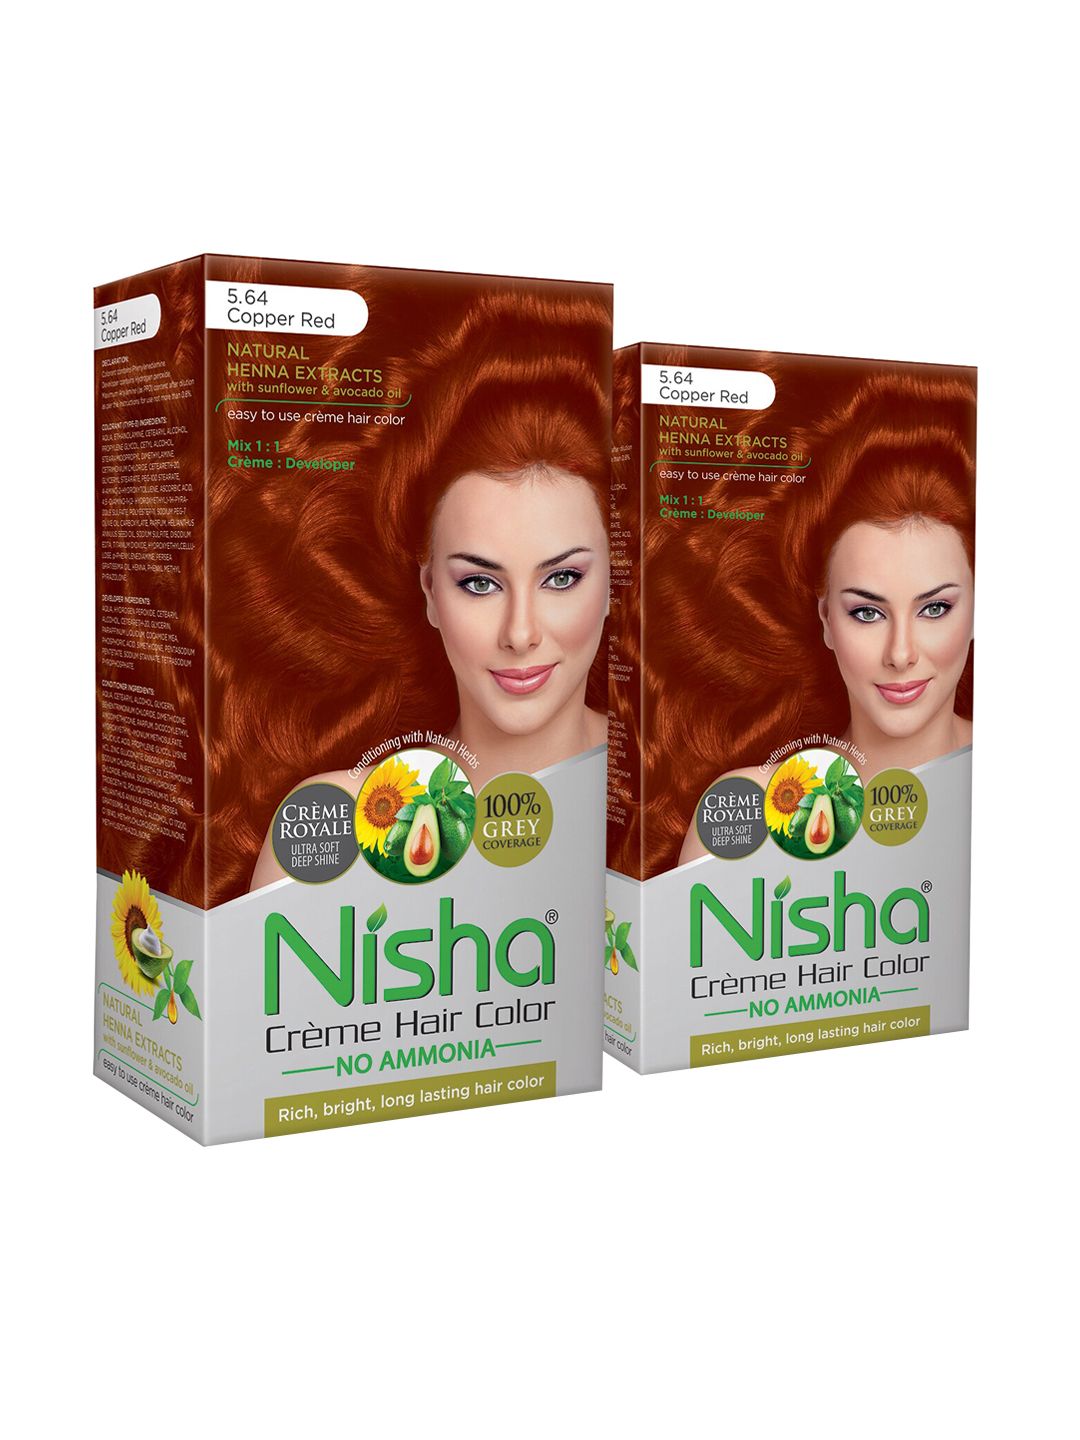 Nisha Pack of 2 Creme Hair Colour 240g - Copper Red Price in India